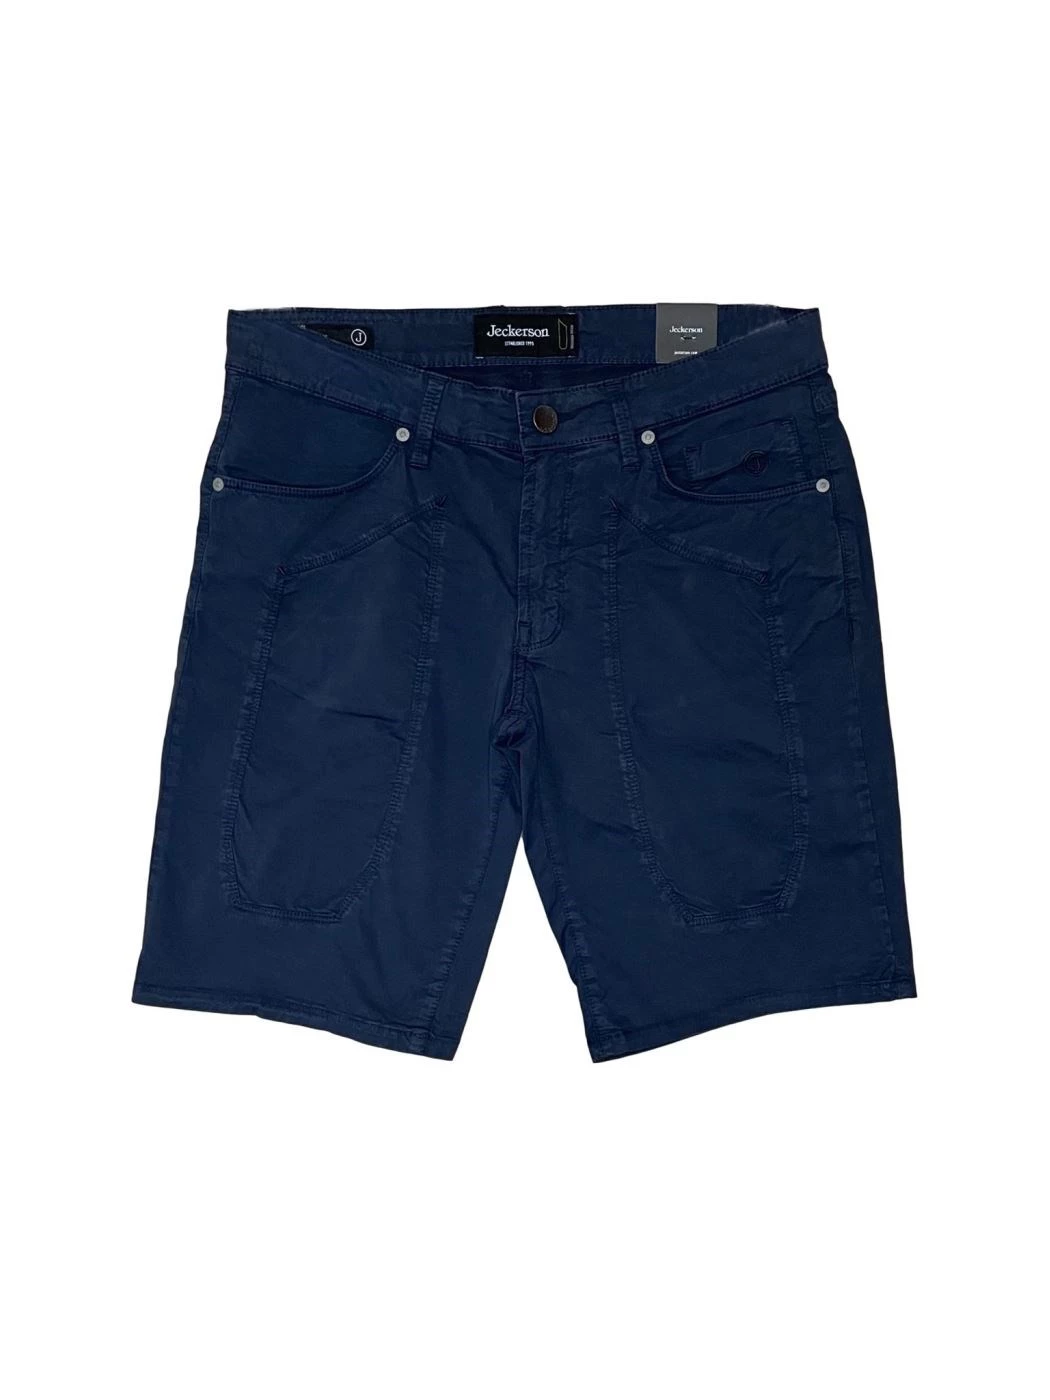 Short trousers with Jeckerson patch